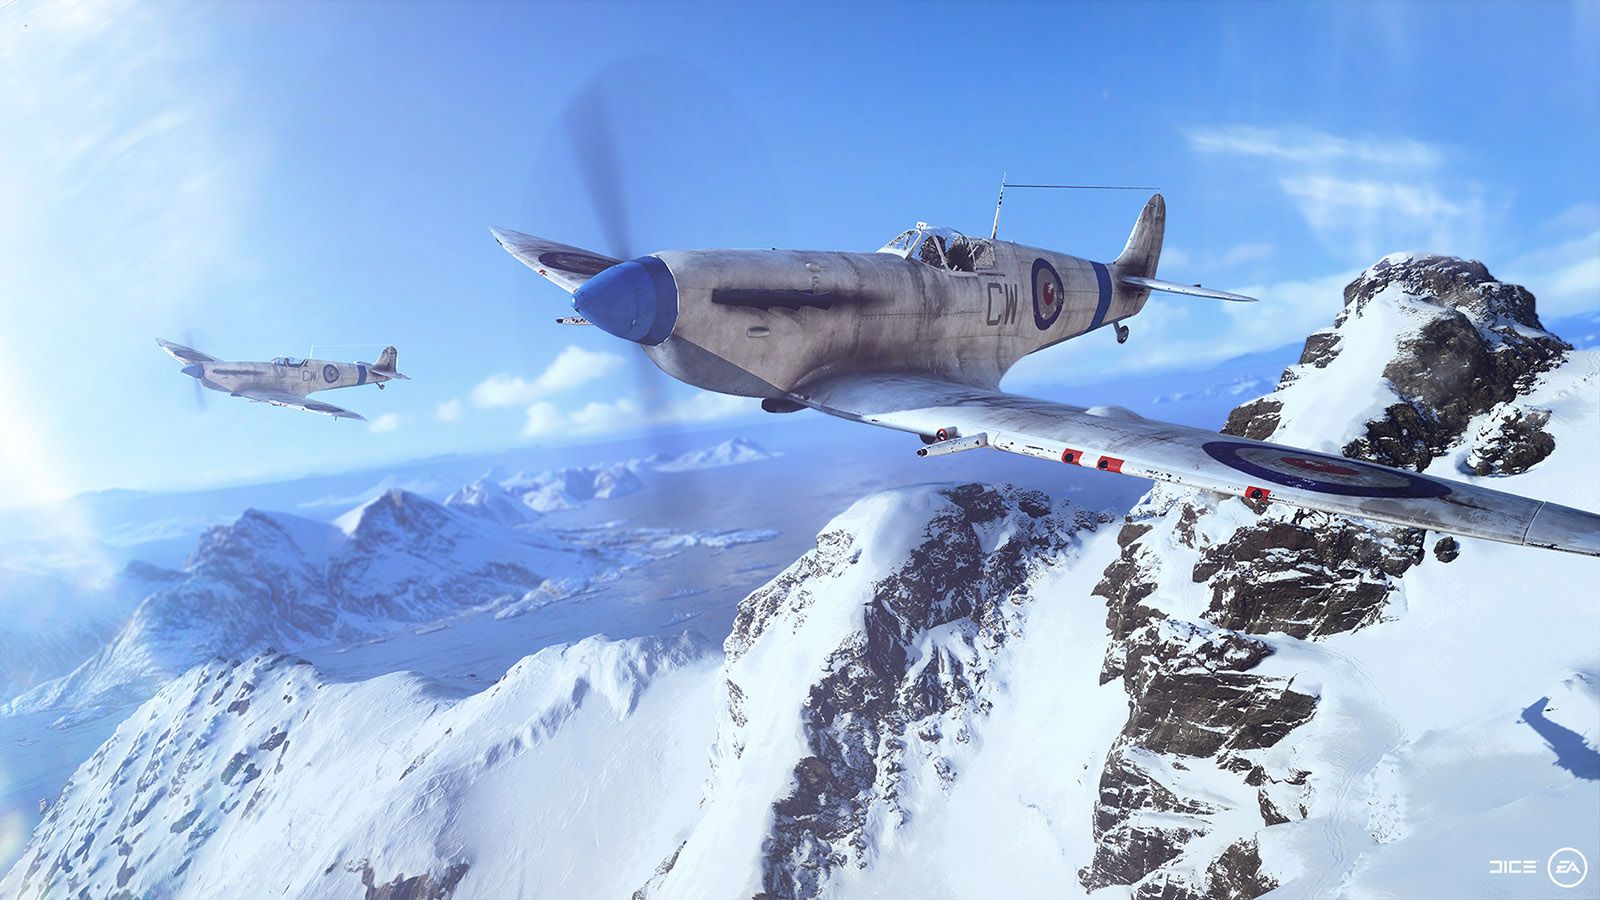 Battlefield 1 & Battlefield 5 free on Prime Gaming in limited time deal